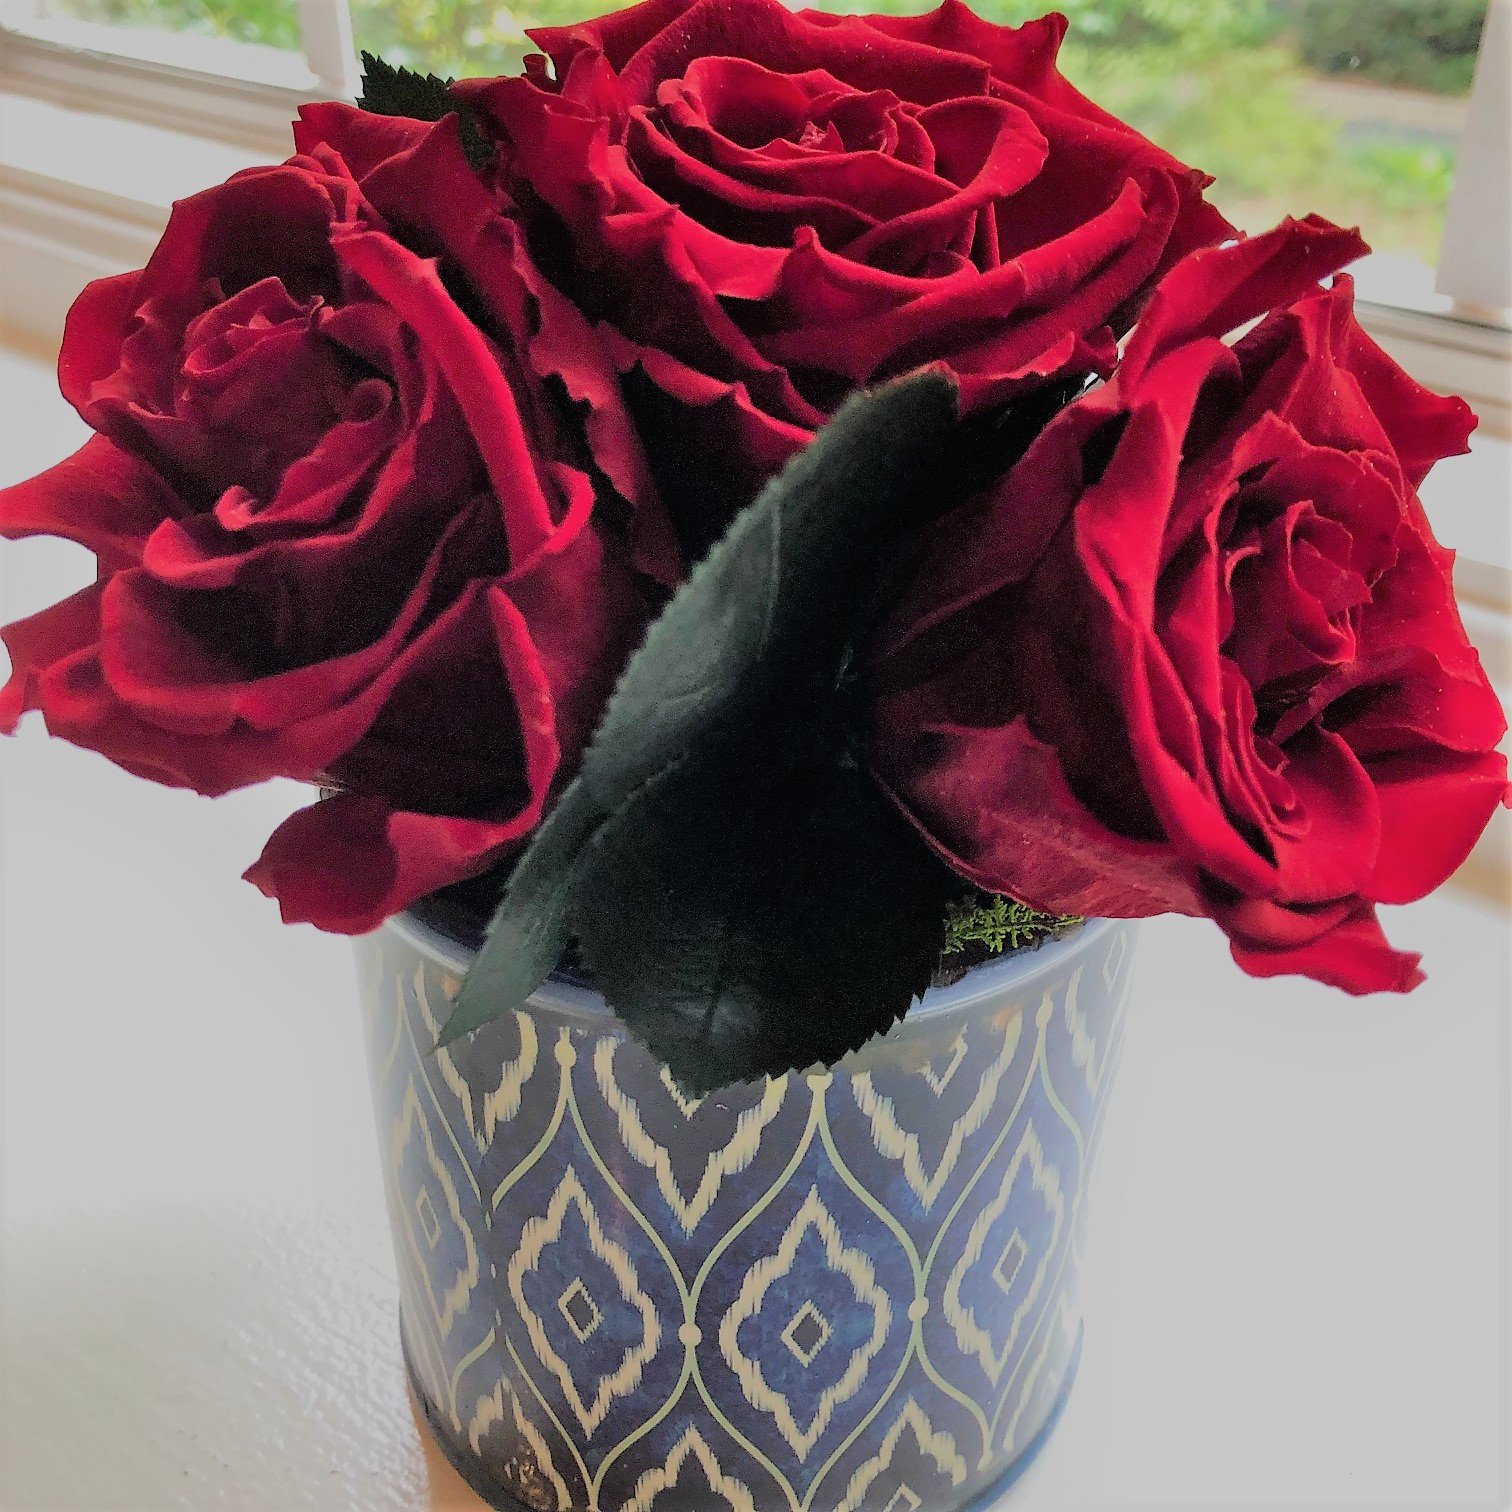 127 Preserved Red Roses in small vase